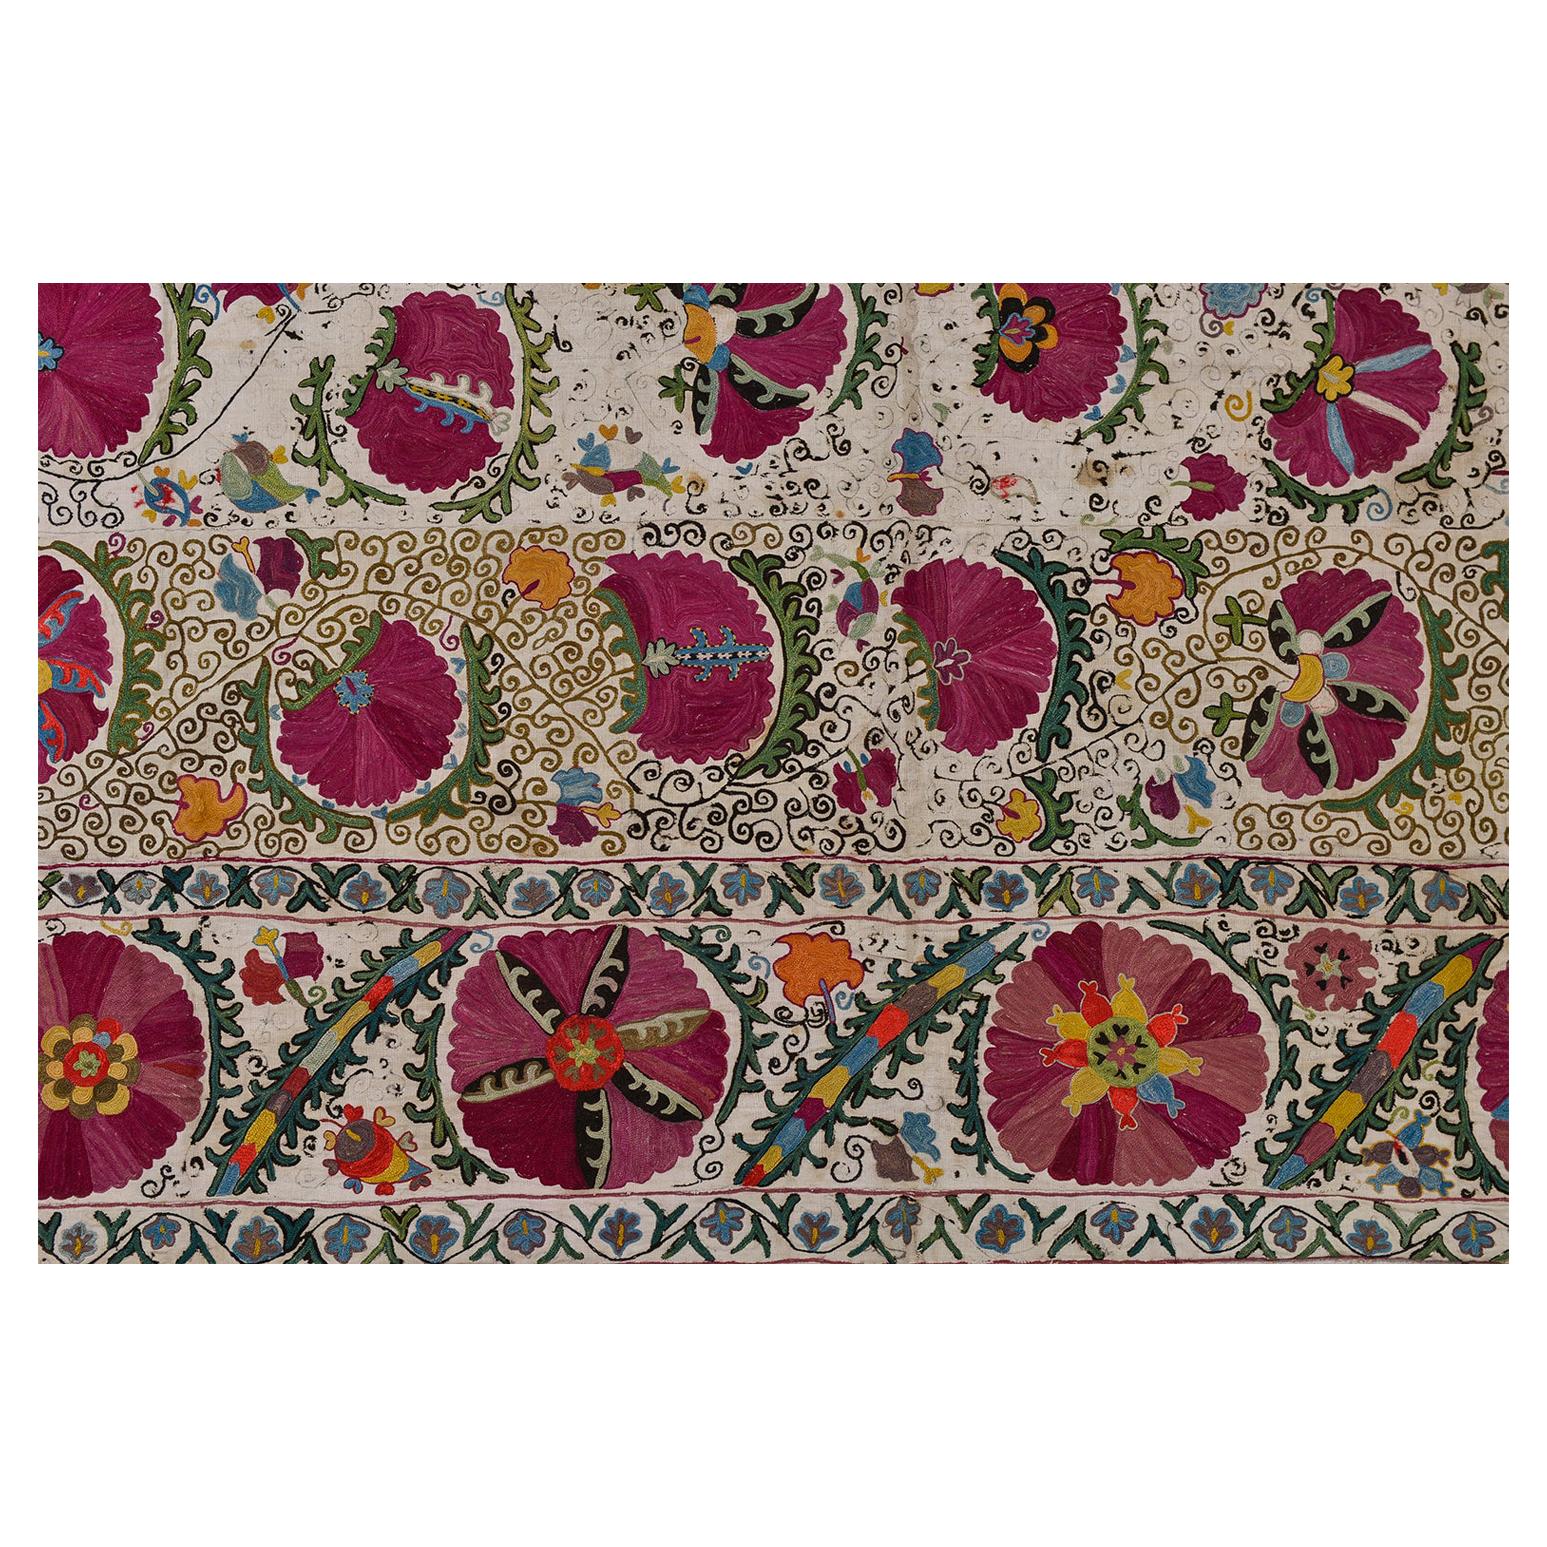  Rare Silk Antique Suzani from Private Collection suitable for Wall, Bed, Table